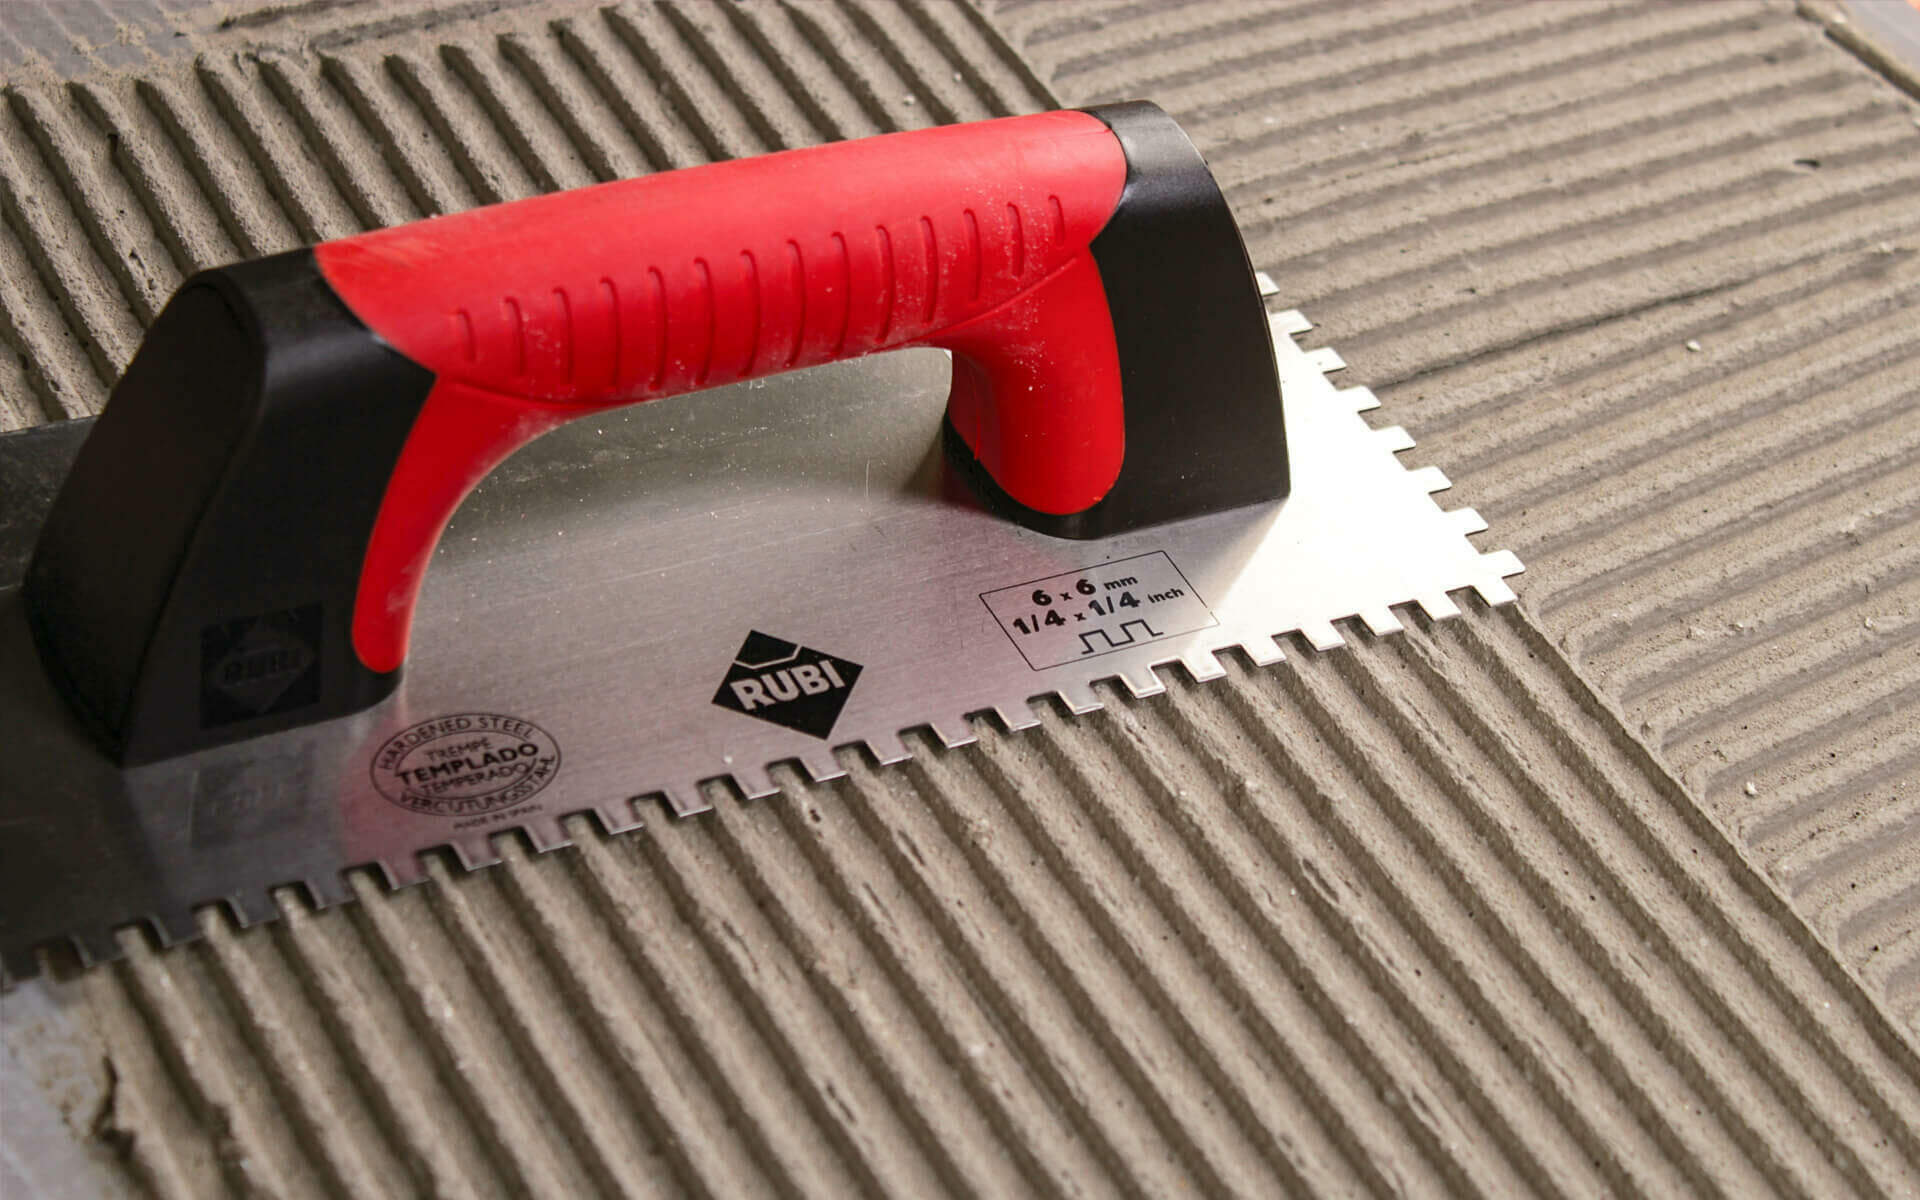 Hot to choose the right tile trowel size